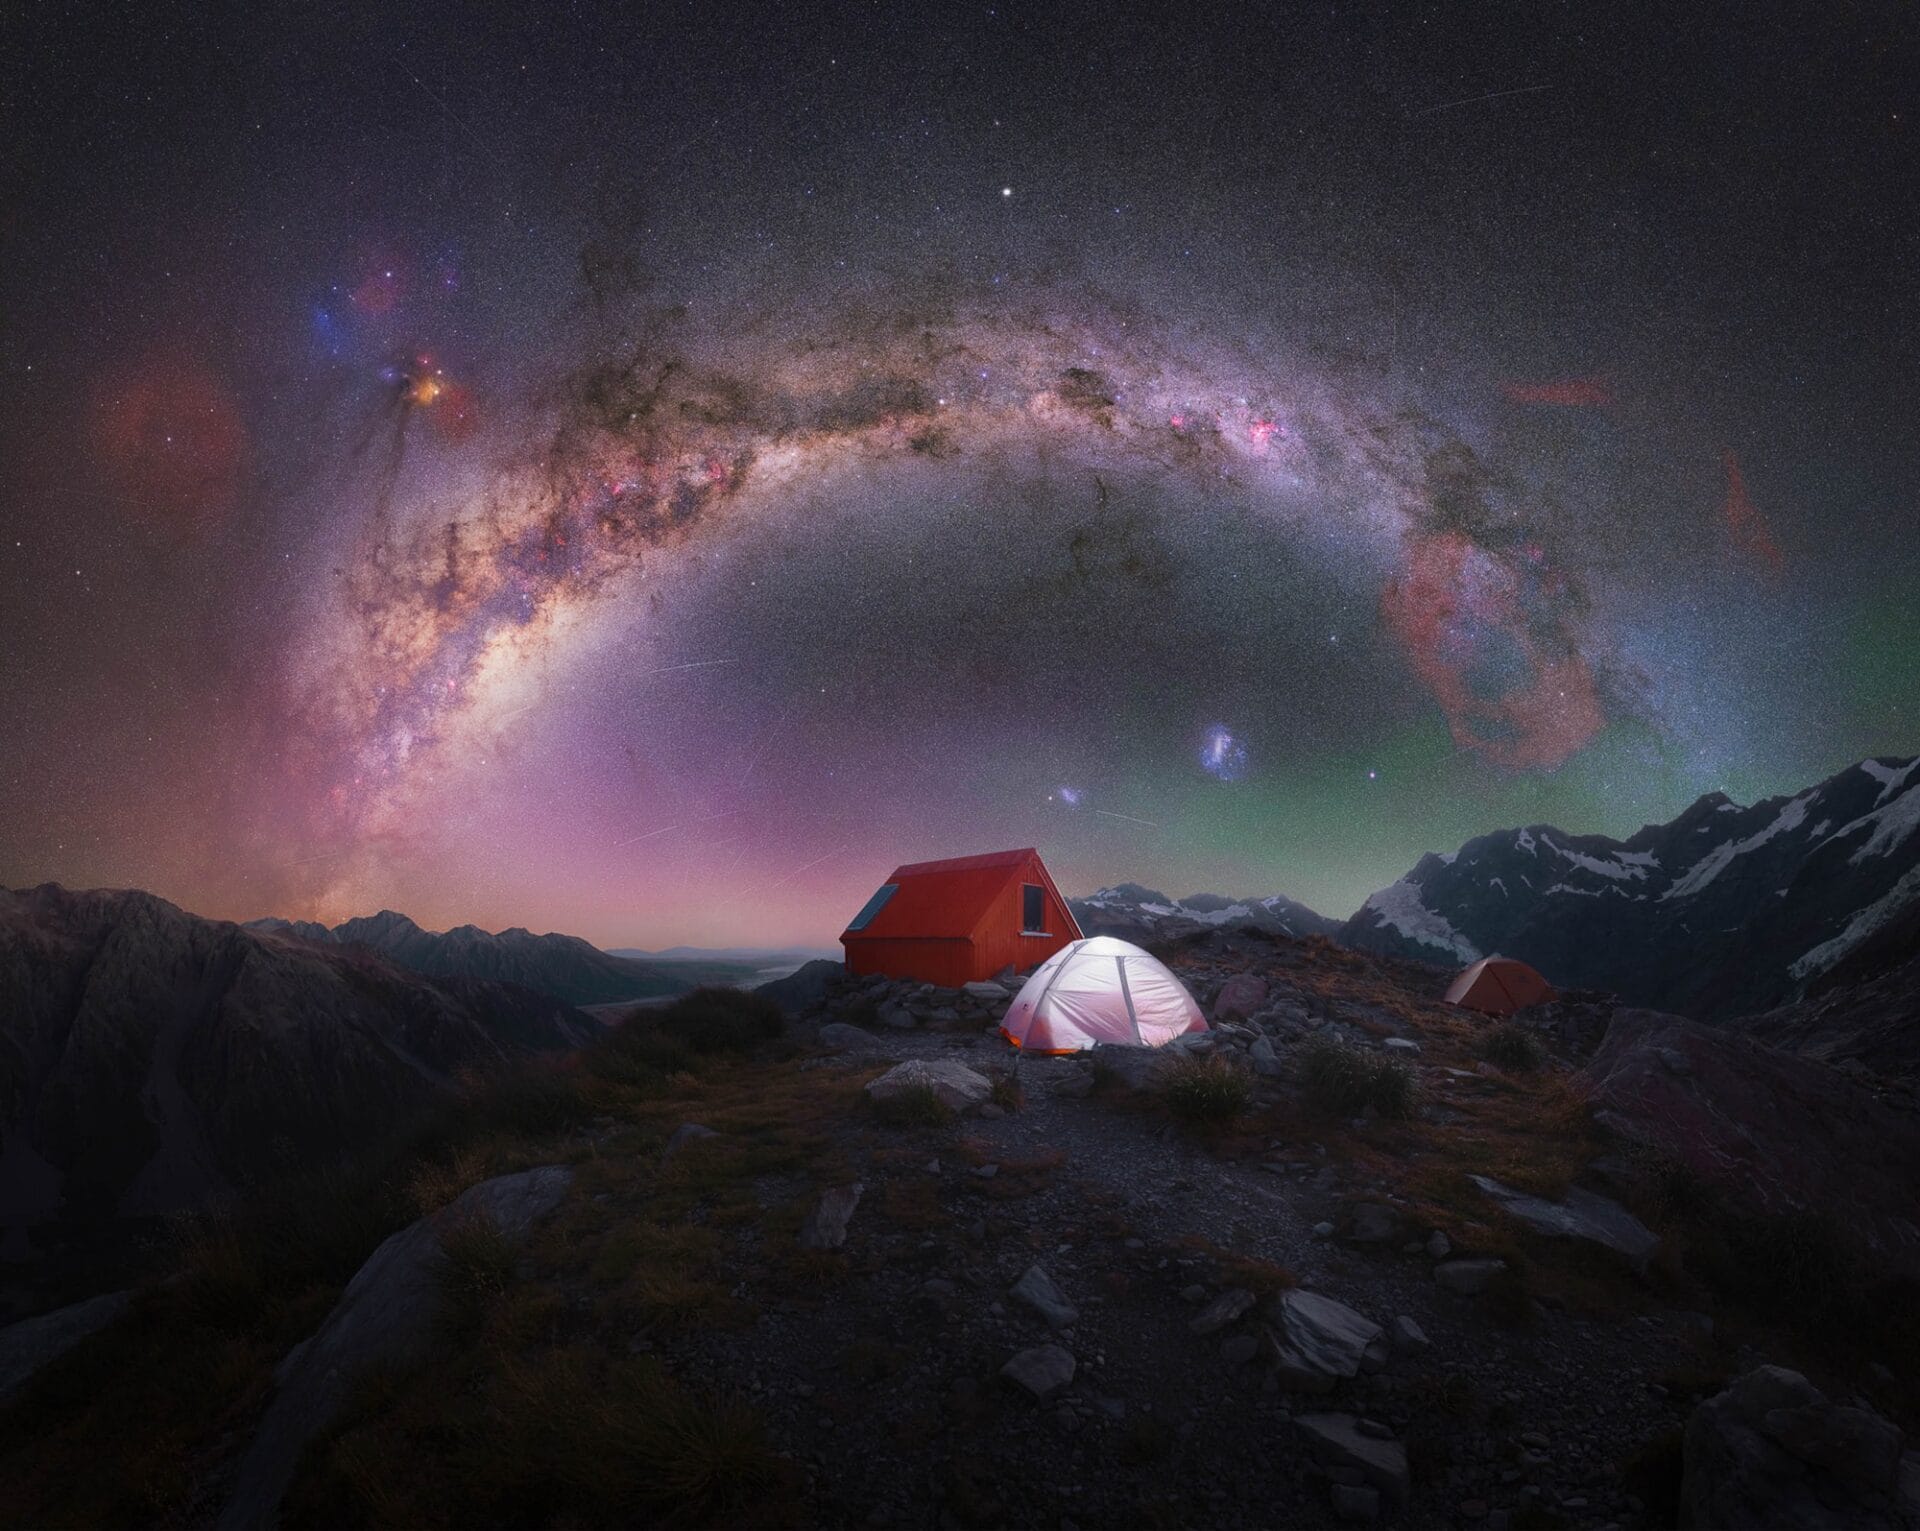 the brilliant star studded milky way above a mountainous landscape with a red shack and tents